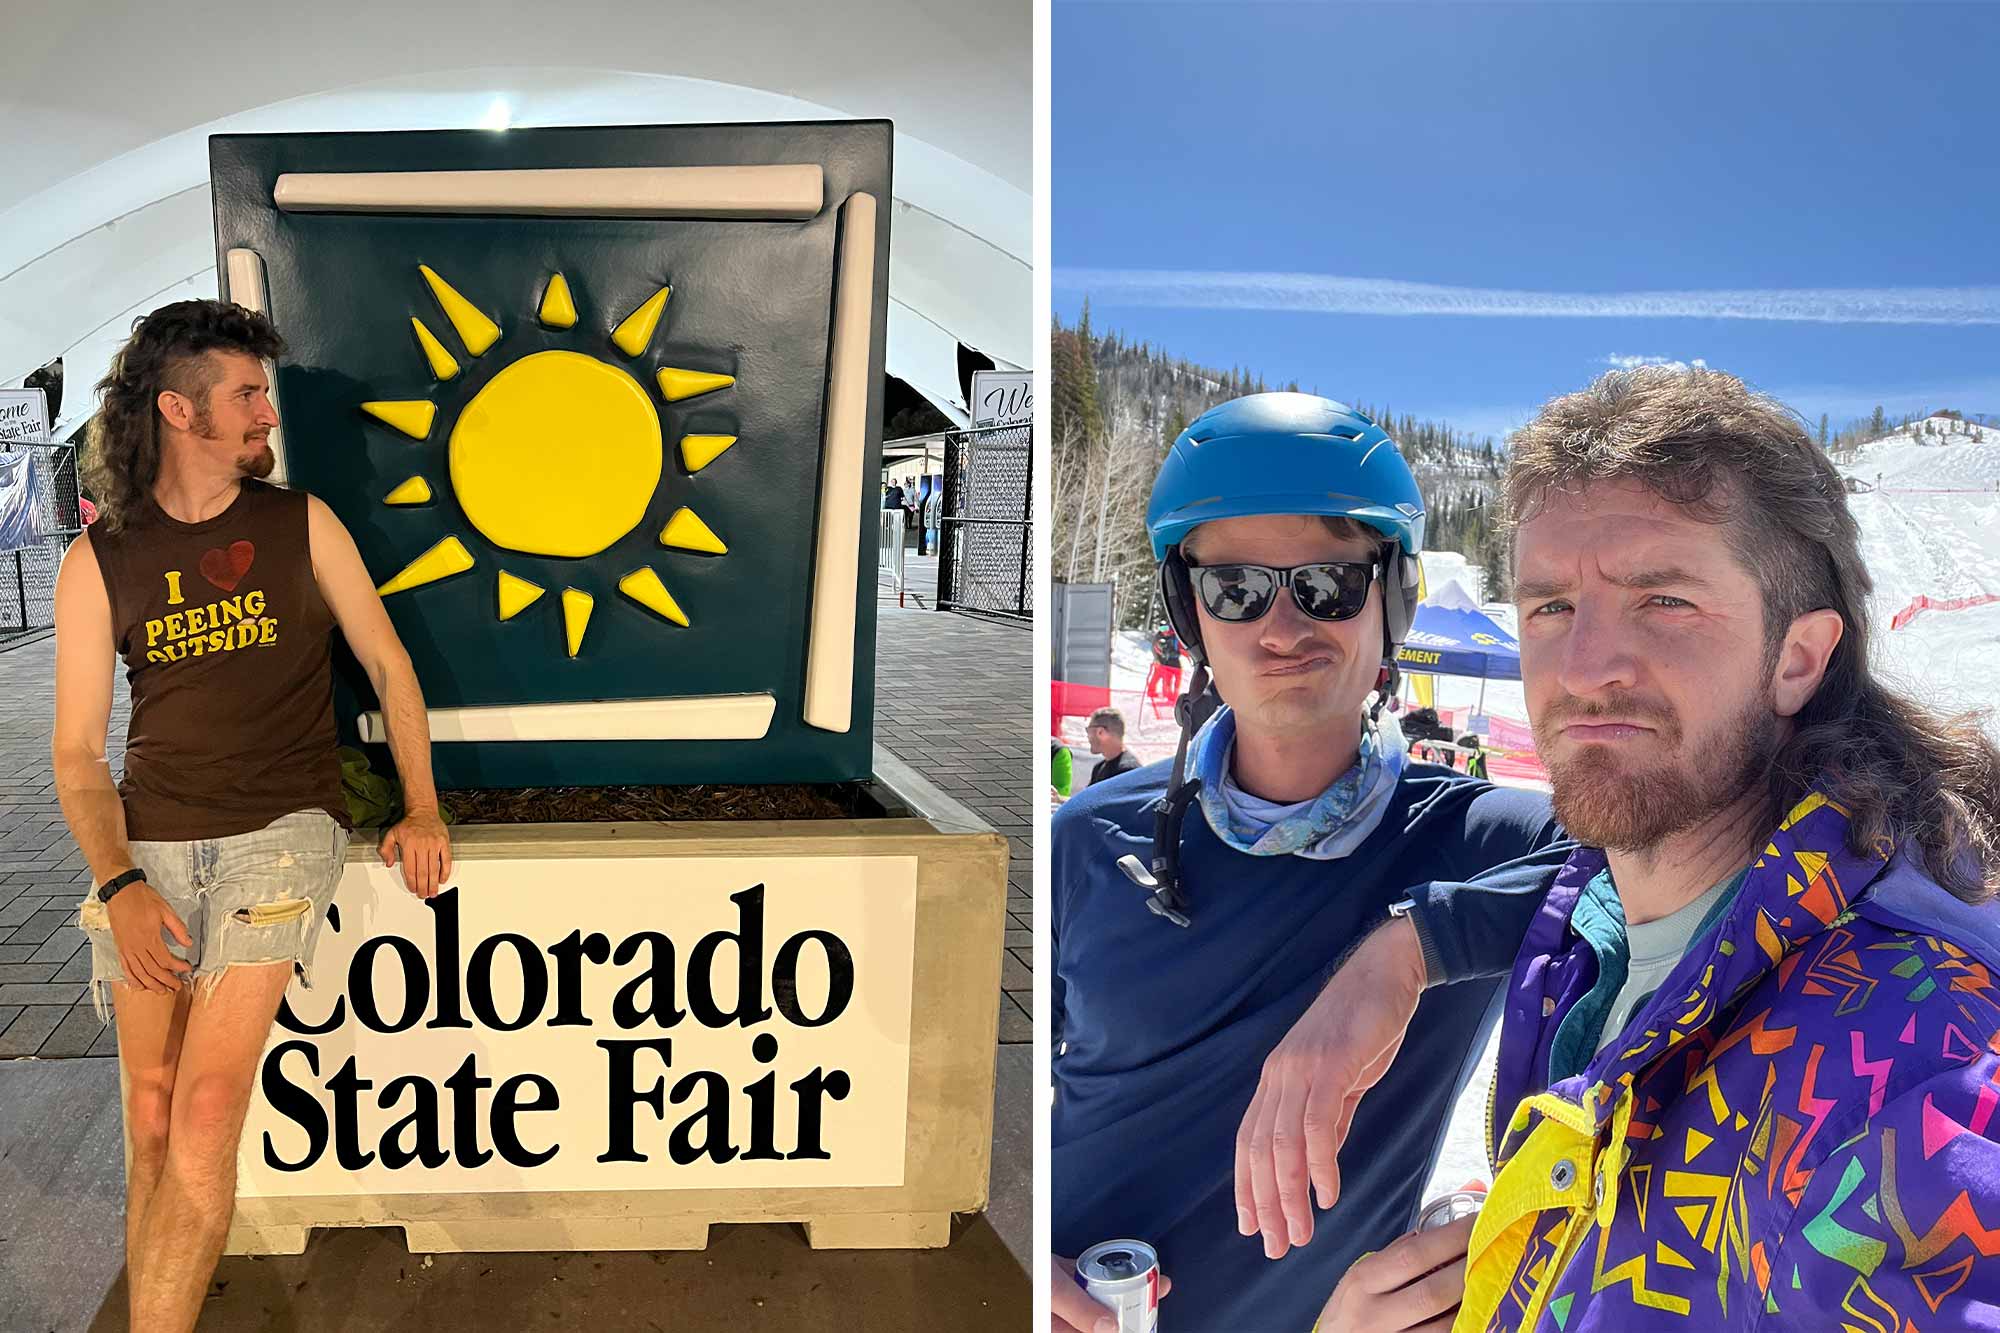 Darius Nabors leans on a Colorado State Fair sign, and poses for a portrait with a man in a helmet